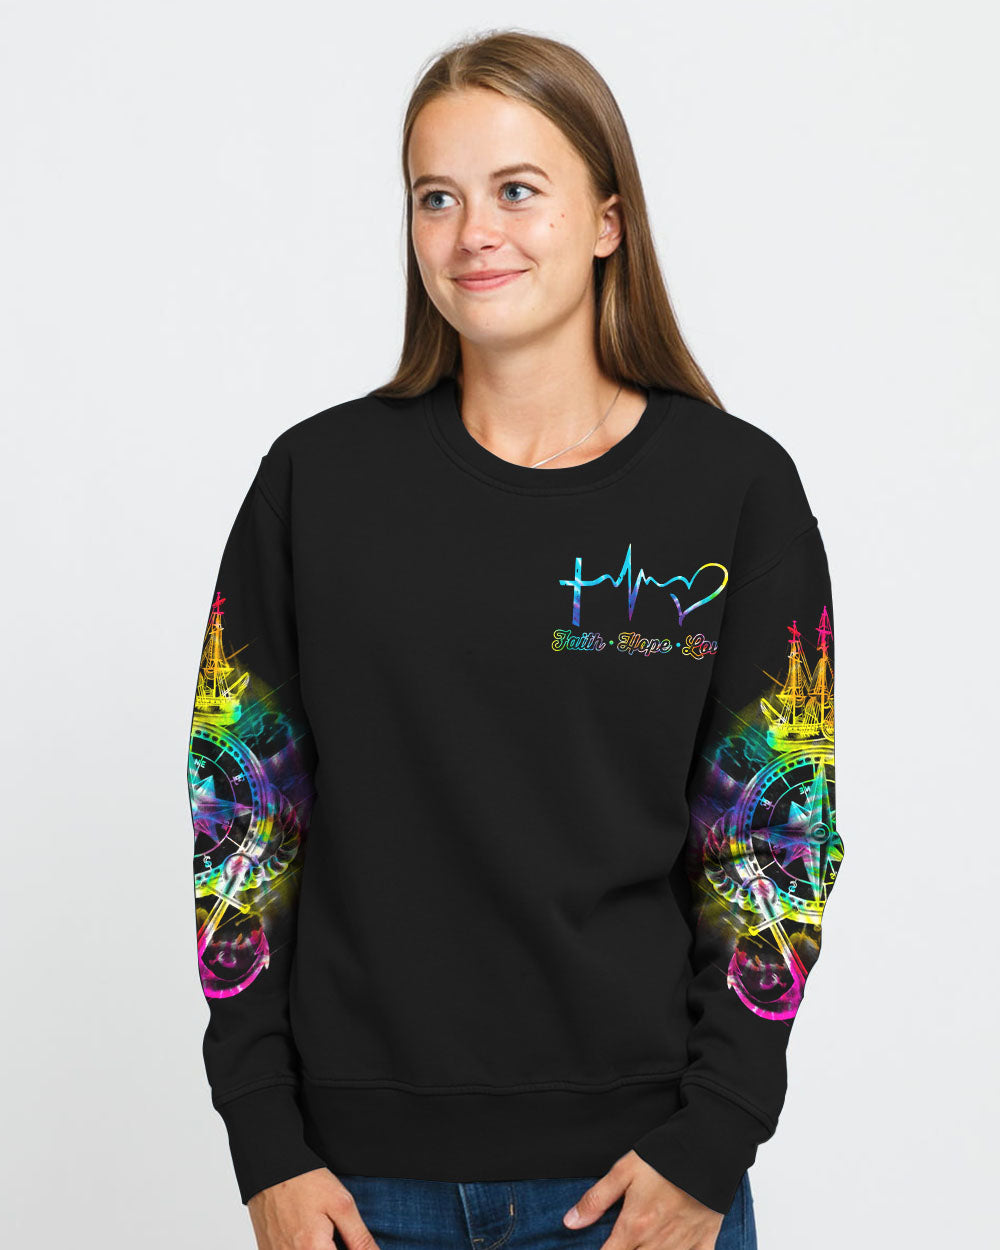 Hope Is The Anchor Of My Soul Colorful Tie Dye Women's Christian Sweatshirt